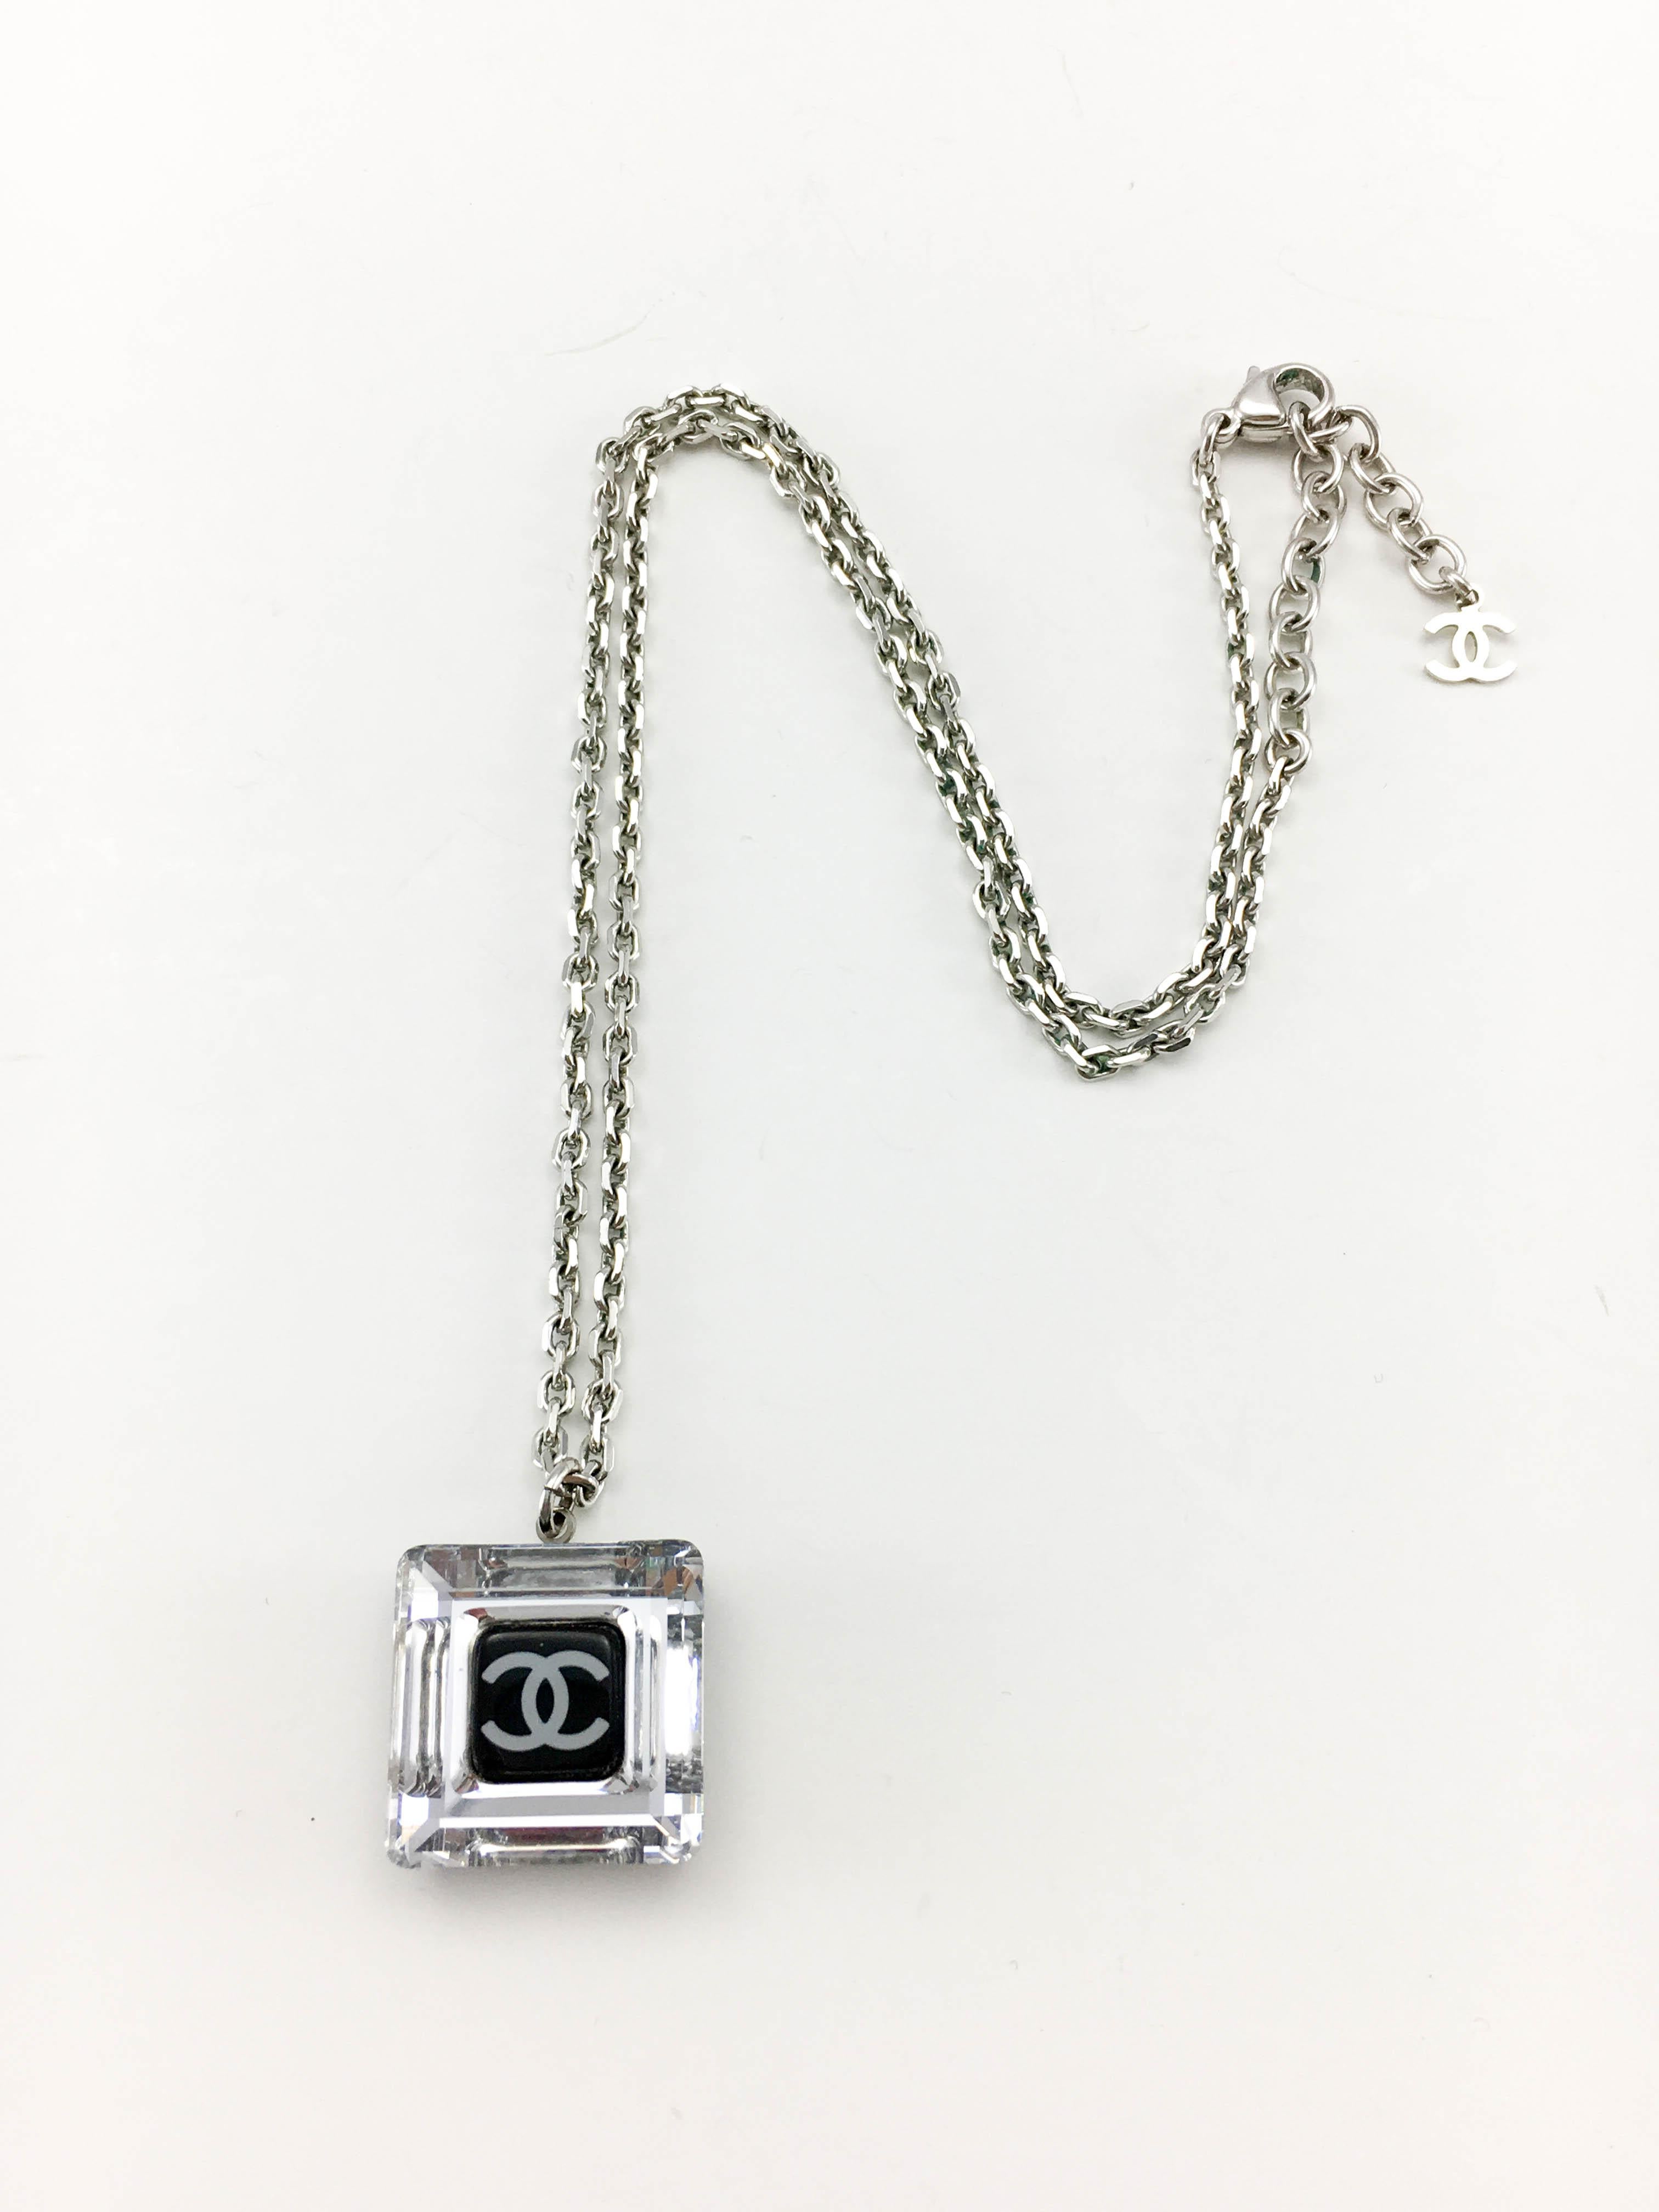 Chanel Square Logo Pendant Necklace - 2005 In Excellent Condition In London, Chelsea